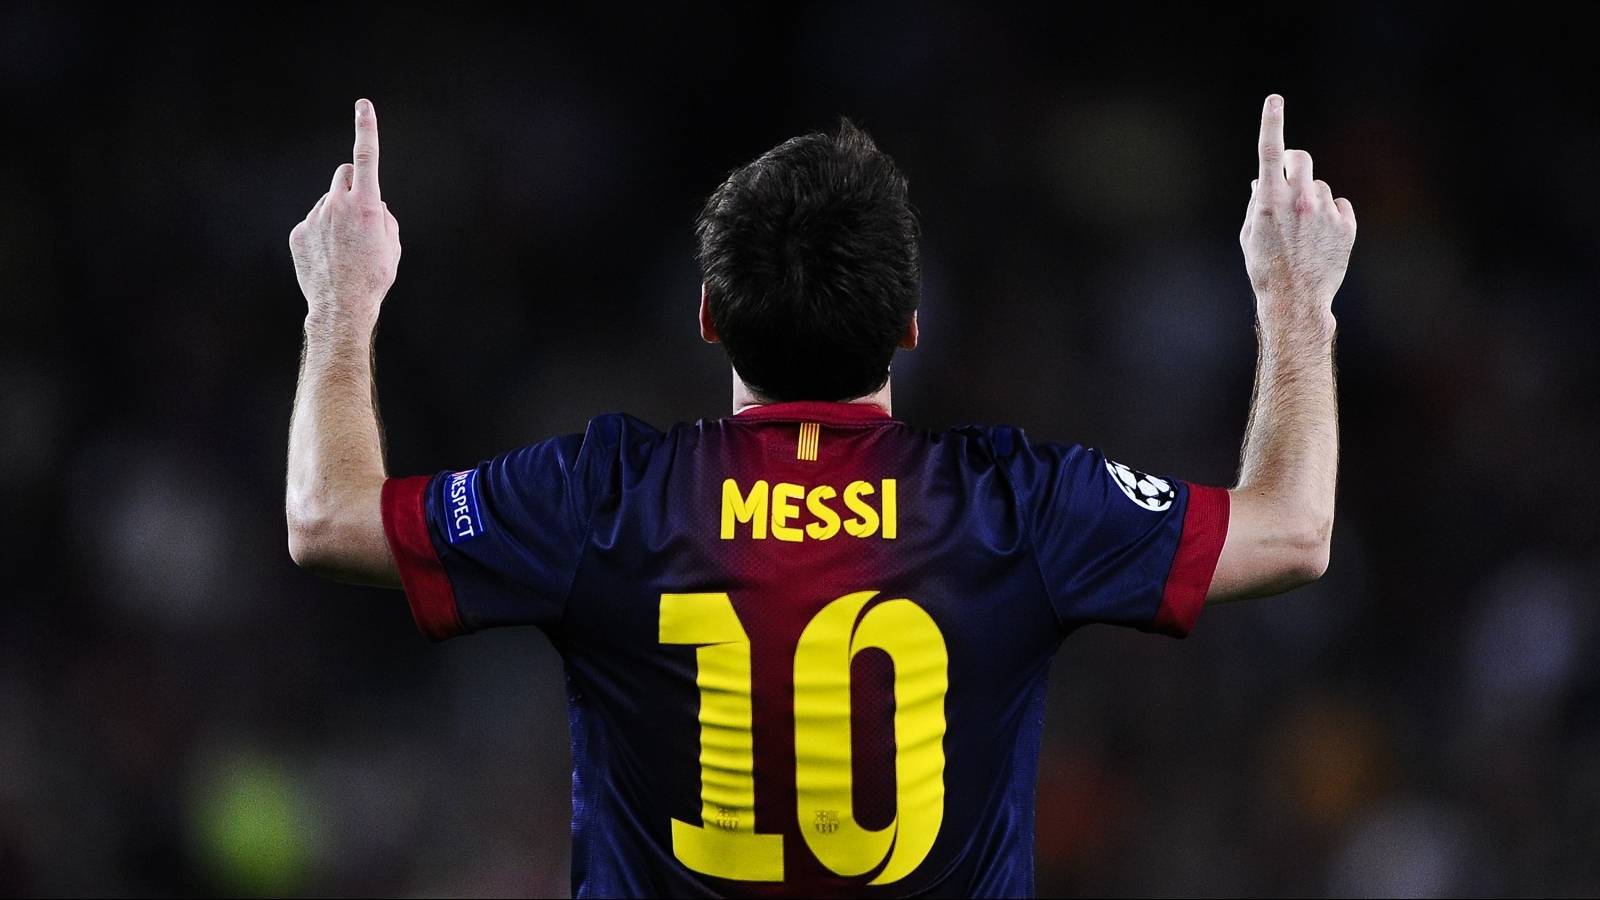 lionel andres messi, people, sports, men, football, black Full HD